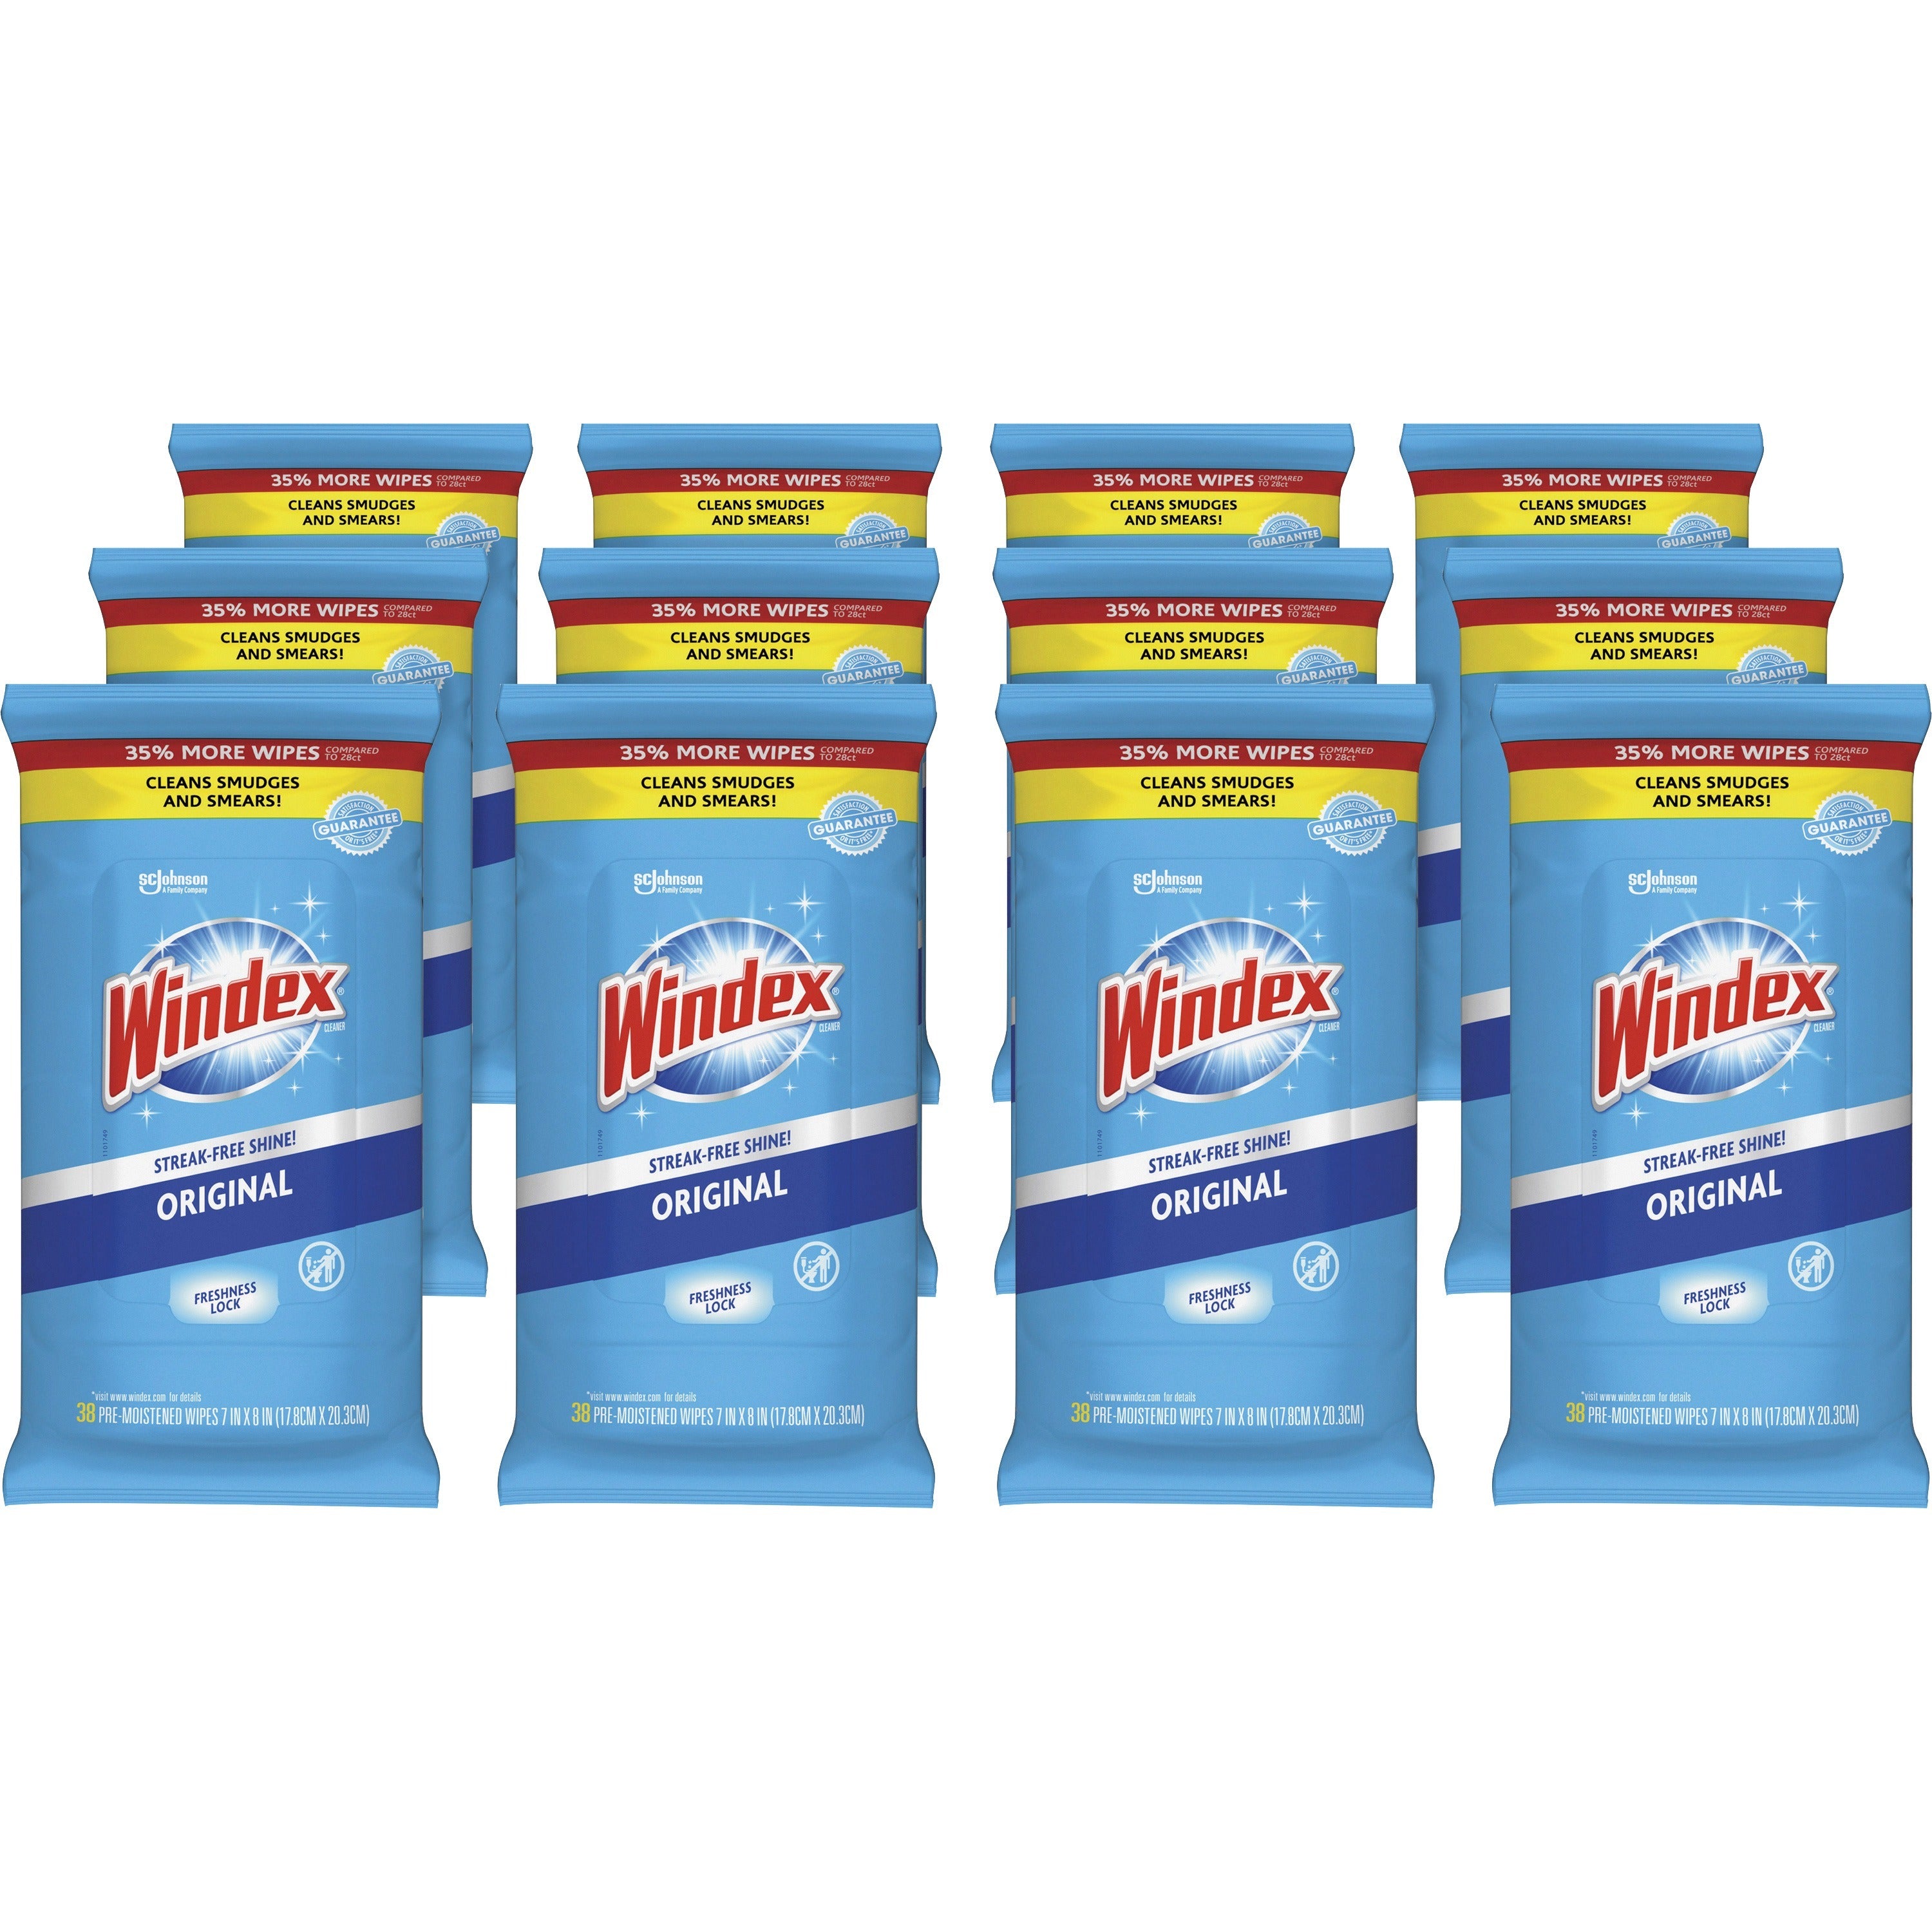 windex-glass-&-surface-wipes-ready-to-use-38-pack-12-carton-streak-free-unscented-chemical-free-white_sjn319251ct - 1